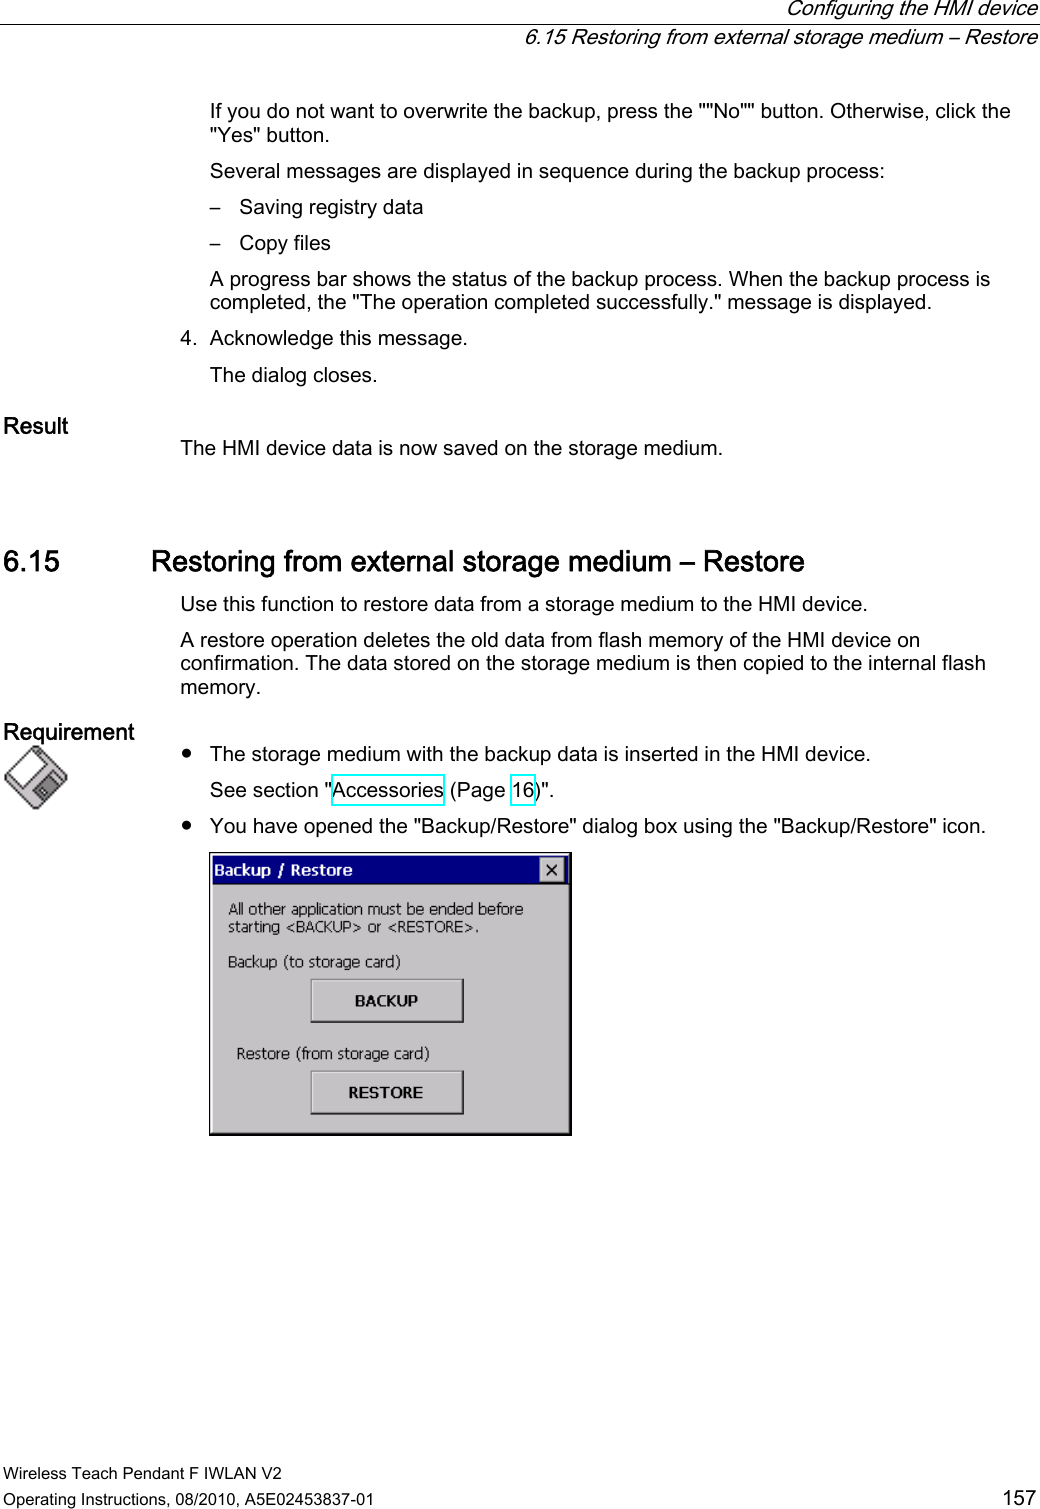  Configuring the HMI device   6.15 Restoring from external storage medium – Restore Wireless Teach Pendant F IWLAN V2 Operating Instructions, 08/2010, A5E02453837-01  157 If you do not want to overwrite the backup, press the &quot;&quot;No&quot;&quot; button. Otherwise, click the &quot;Yes&quot; button. Several messages are displayed in sequence during the backup process: –  Saving registry data –  Copy files A progress bar shows the status of the backup process. When the backup process is completed, the &quot;The operation completed successfully.&quot; message is displayed. 4. Acknowledge this message. The dialog closes. Result  The HMI device data is now saved on the storage medium. 6.15 Restoring from external storage medium – Restore Use this function to restore data from a storage medium to the HMI device. A restore operation deletes the old data from flash memory of the HMI device on confirmation. The data stored on the storage medium is then copied to the internal flash memory. Requirement   ●  The storage medium with the backup data is inserted in the HMI device. See section &quot;Accessories (Page 16)&quot;. ●  You have opened the &quot;Backup/Restore&quot; dialog box using the &quot;Backup/Restore&quot; icon.  PRELIMINARY II 1.7.2010